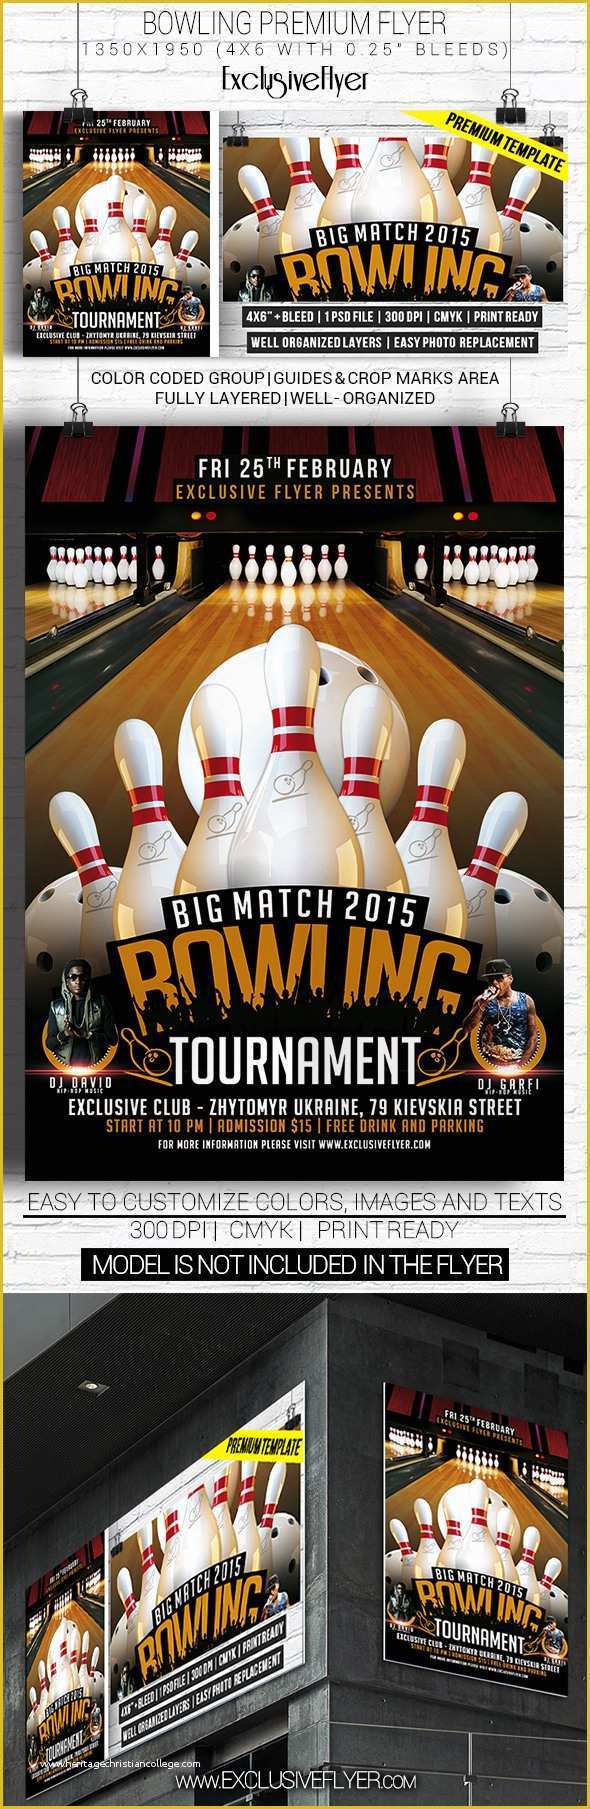 Bowling Flyer Template Free Of Bowling tournament – Premium Flyer Template On Behance